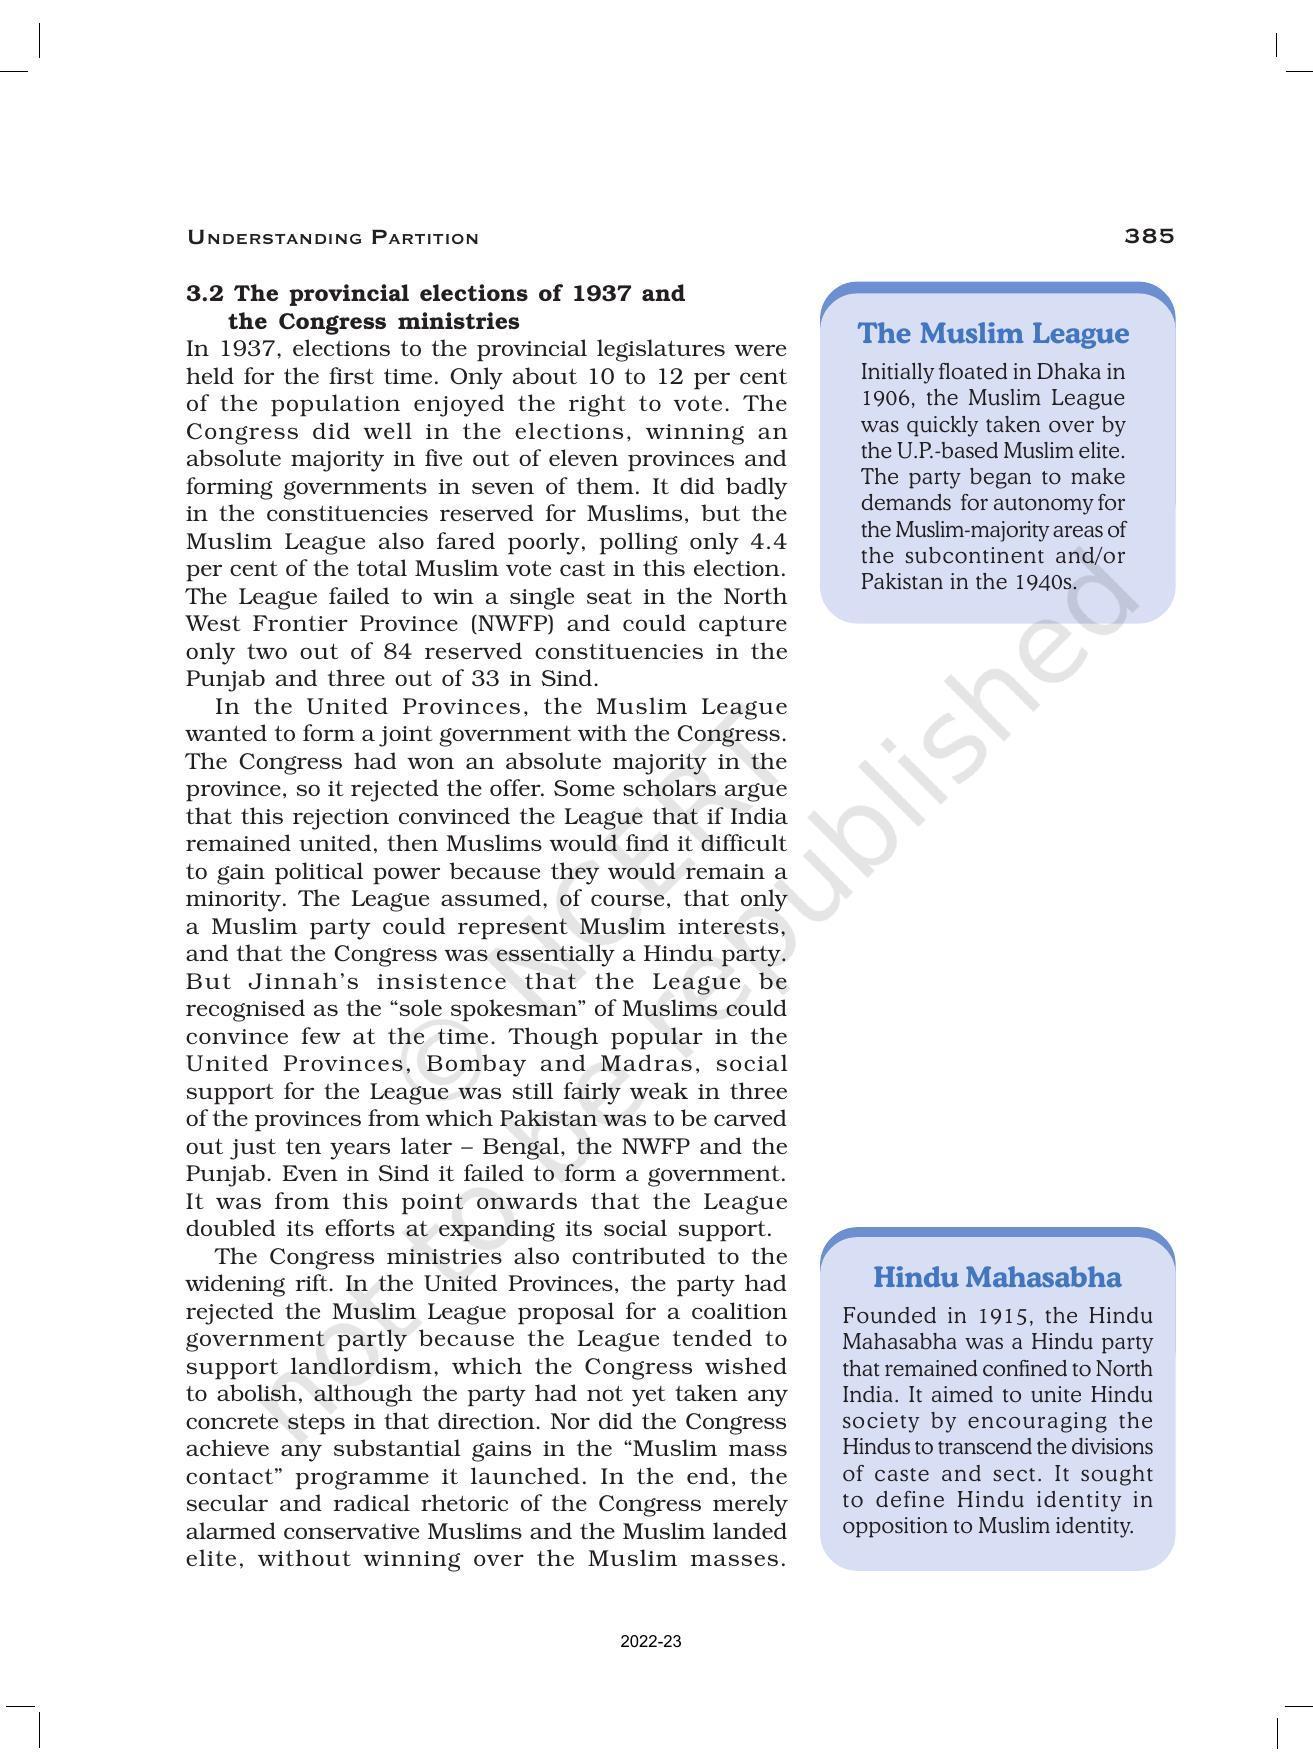 NCERT Book for Class 12 History (Part-III) Chapter 14 Understanding Partition - Page 10